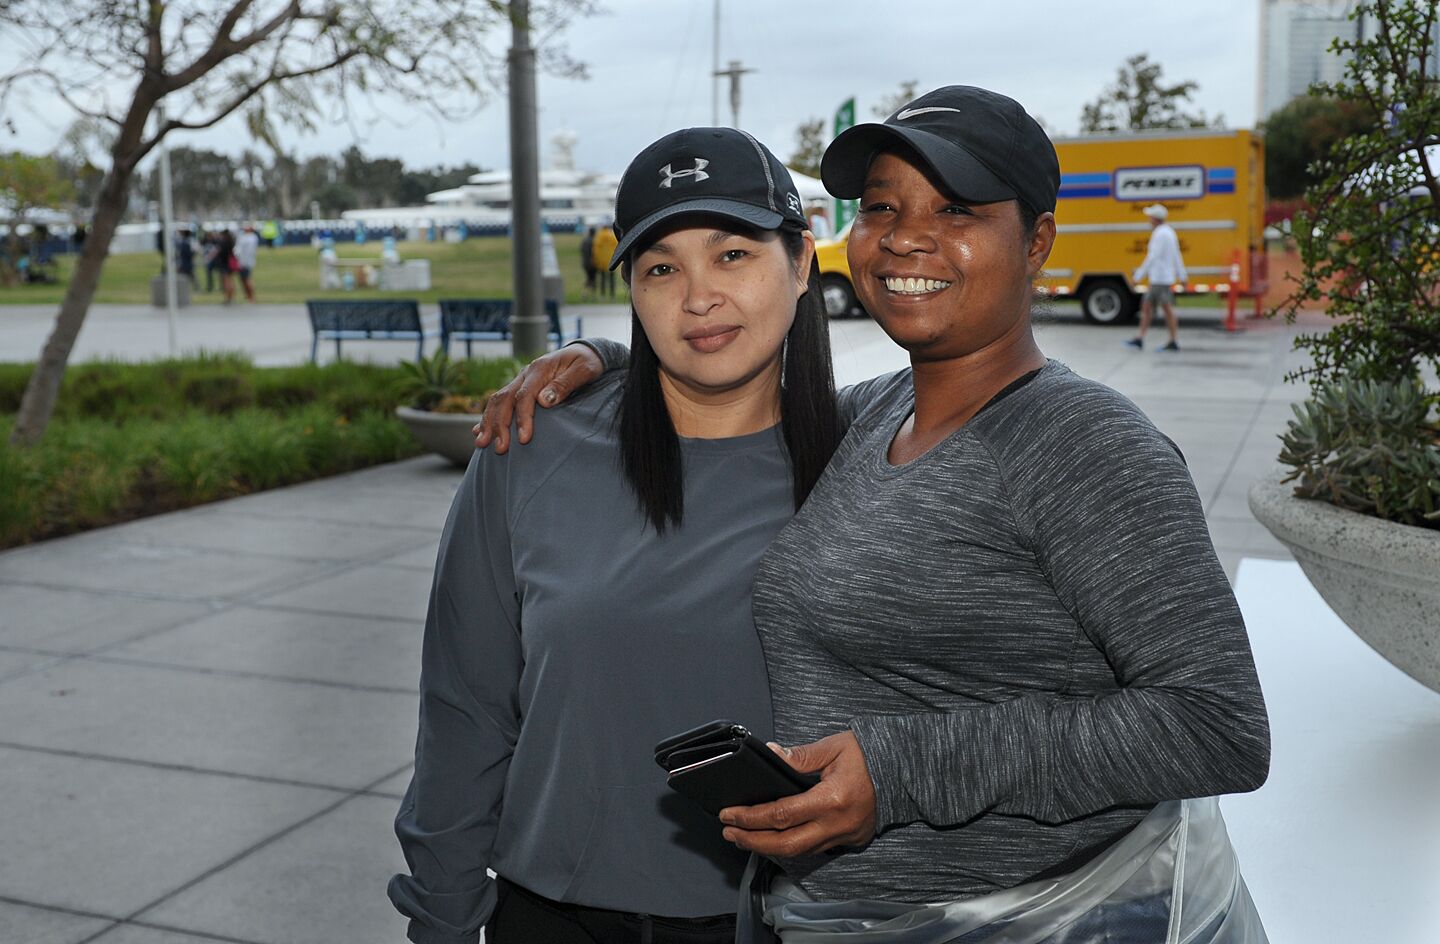 Dedicated participants didn't let a little rain get in the way of the Navy Bay Bridge Run/Walk on Sunday, May 19, 2019.